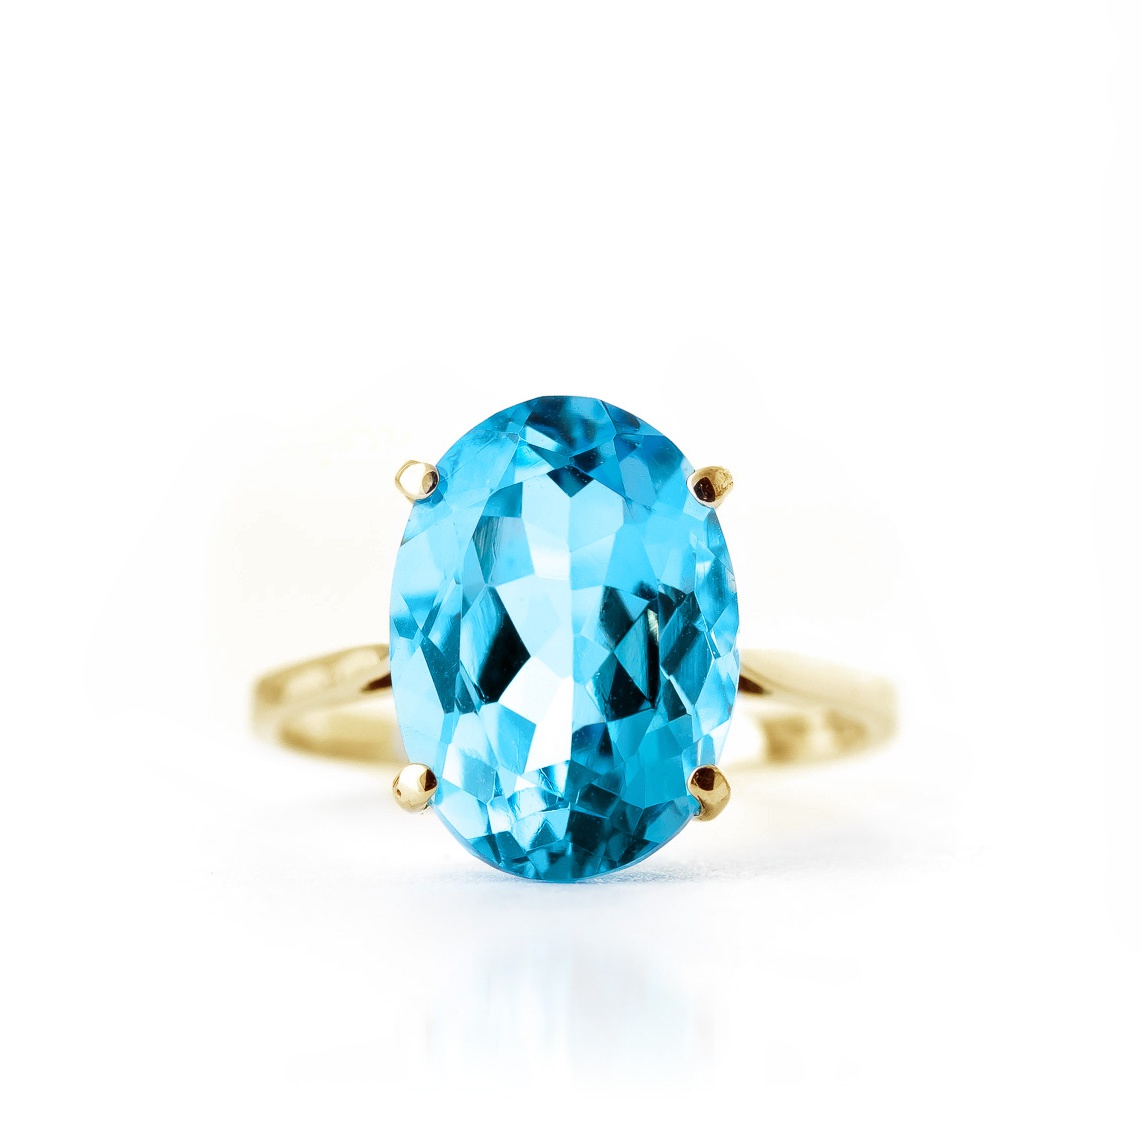 Galaxy Gold 14k High Polished Solid Yellow Gold Ring 8 Carat Natural Oval Blue Topaz (6.5) - image 4 of 5